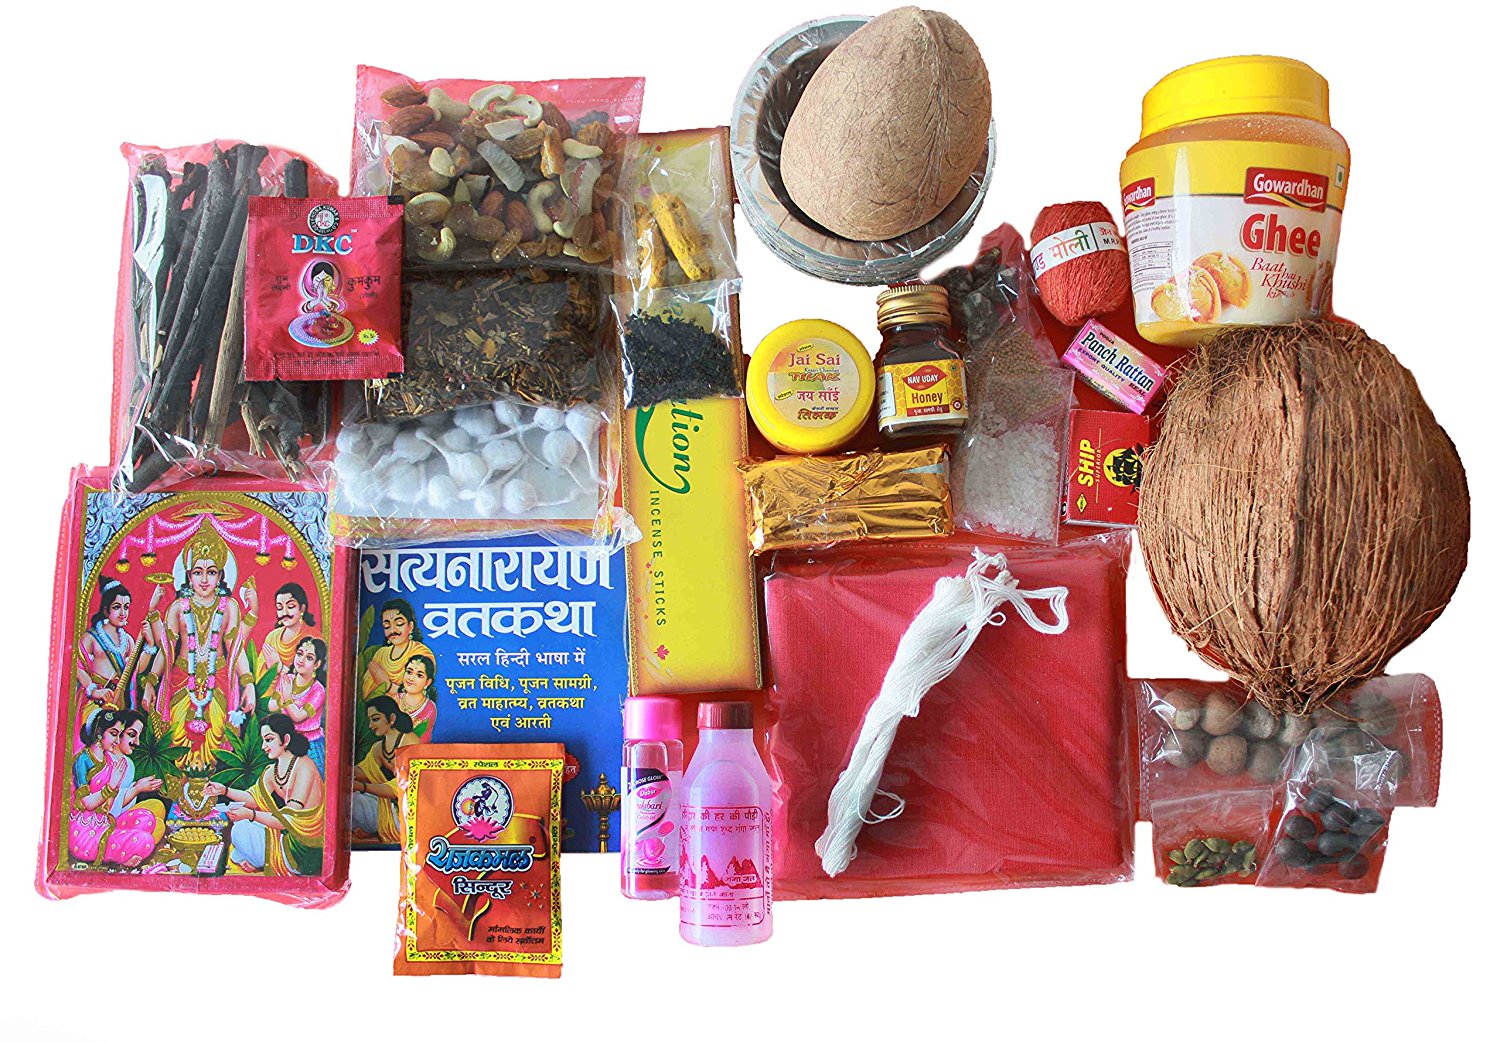 Puja Samagri : Online Puja Samagri Our motto is to provide Best Online  Puja Samagri and services to religious people. Devotie can purchase various puja samghari guide for Indian rituals| LoveLocal